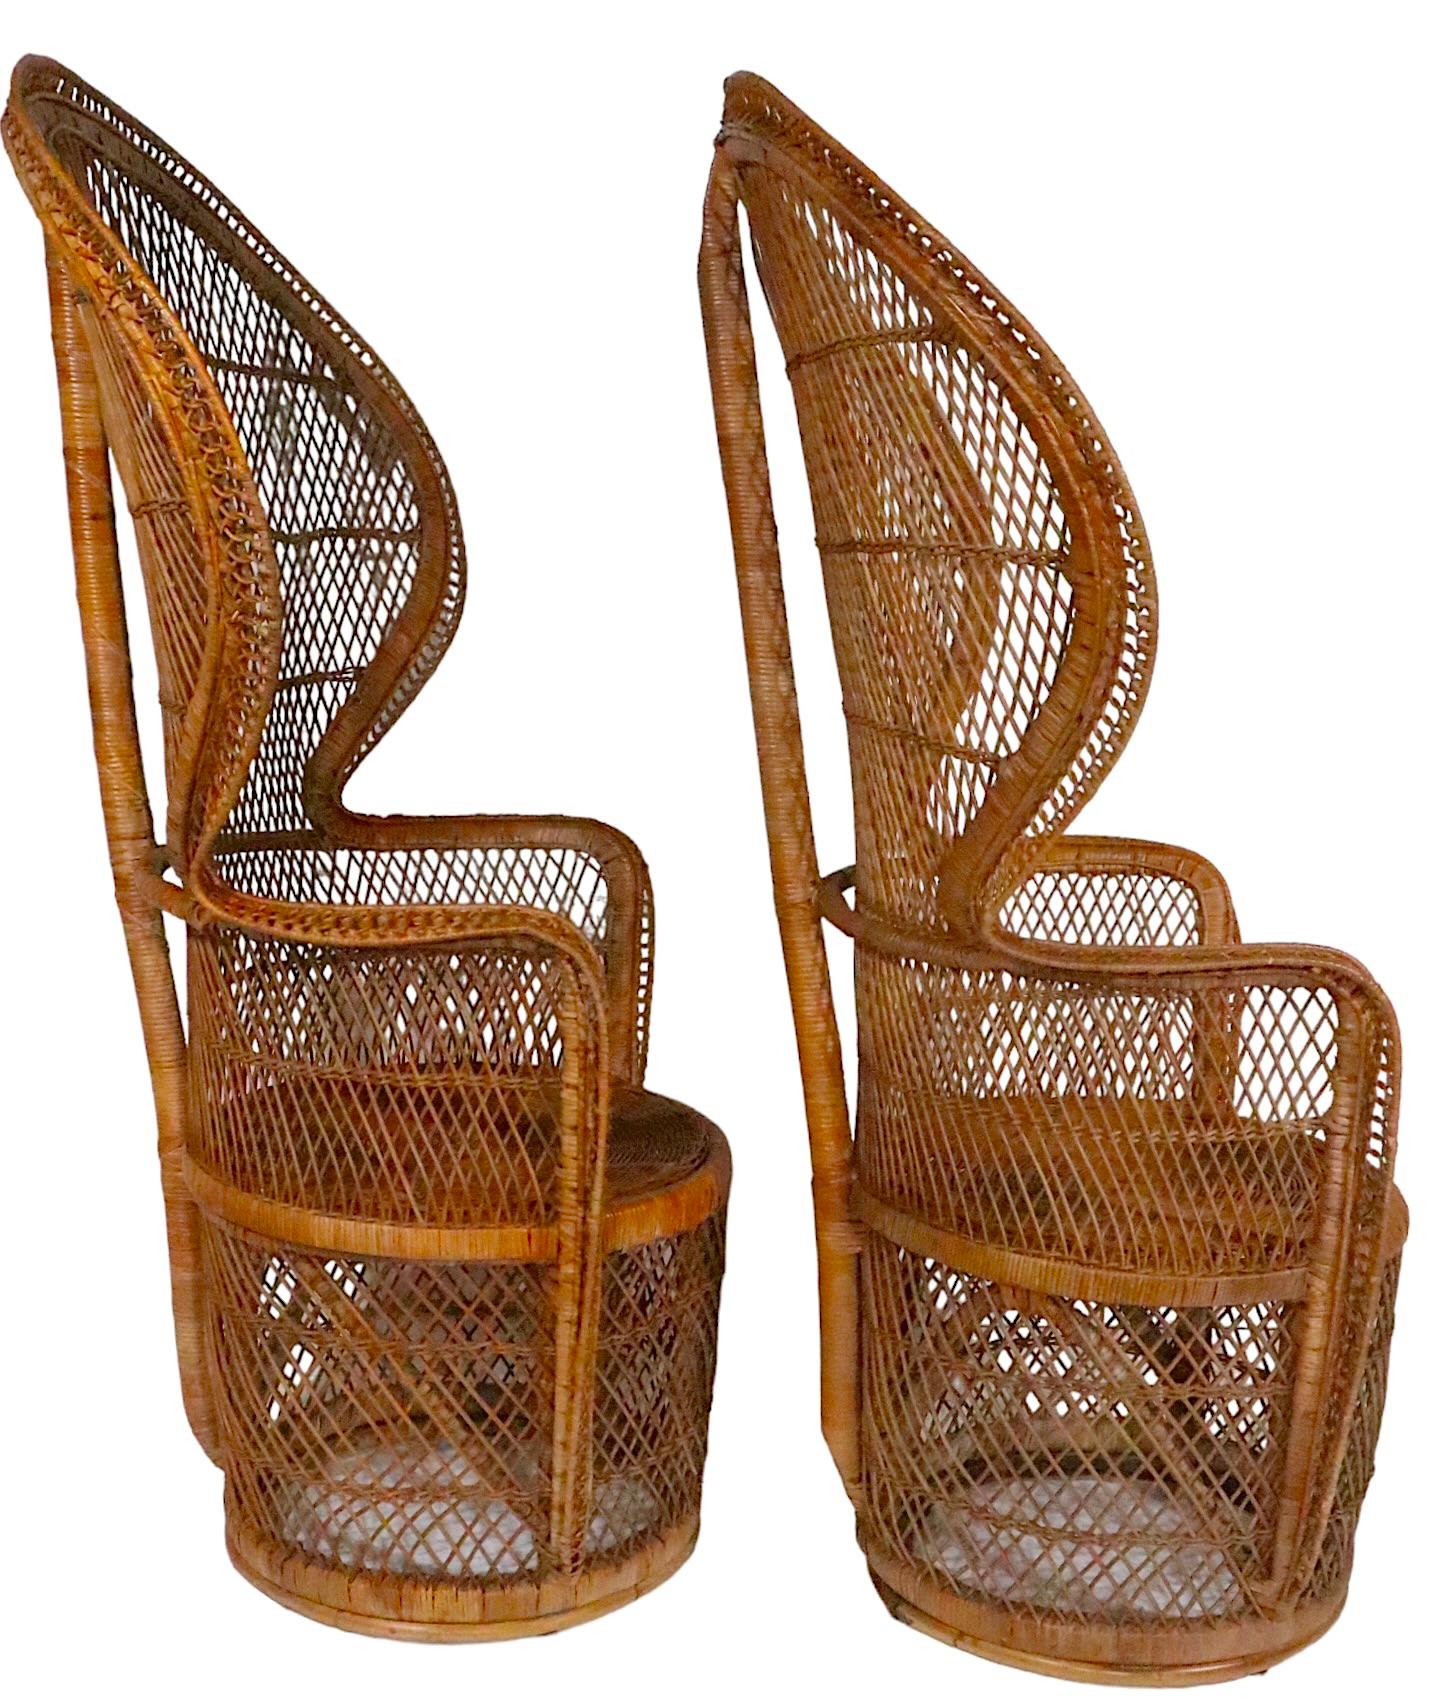 Pr. Vintage Emanuelle Peacock Woven Wicker  Chairs c. 1970's For Sale 2